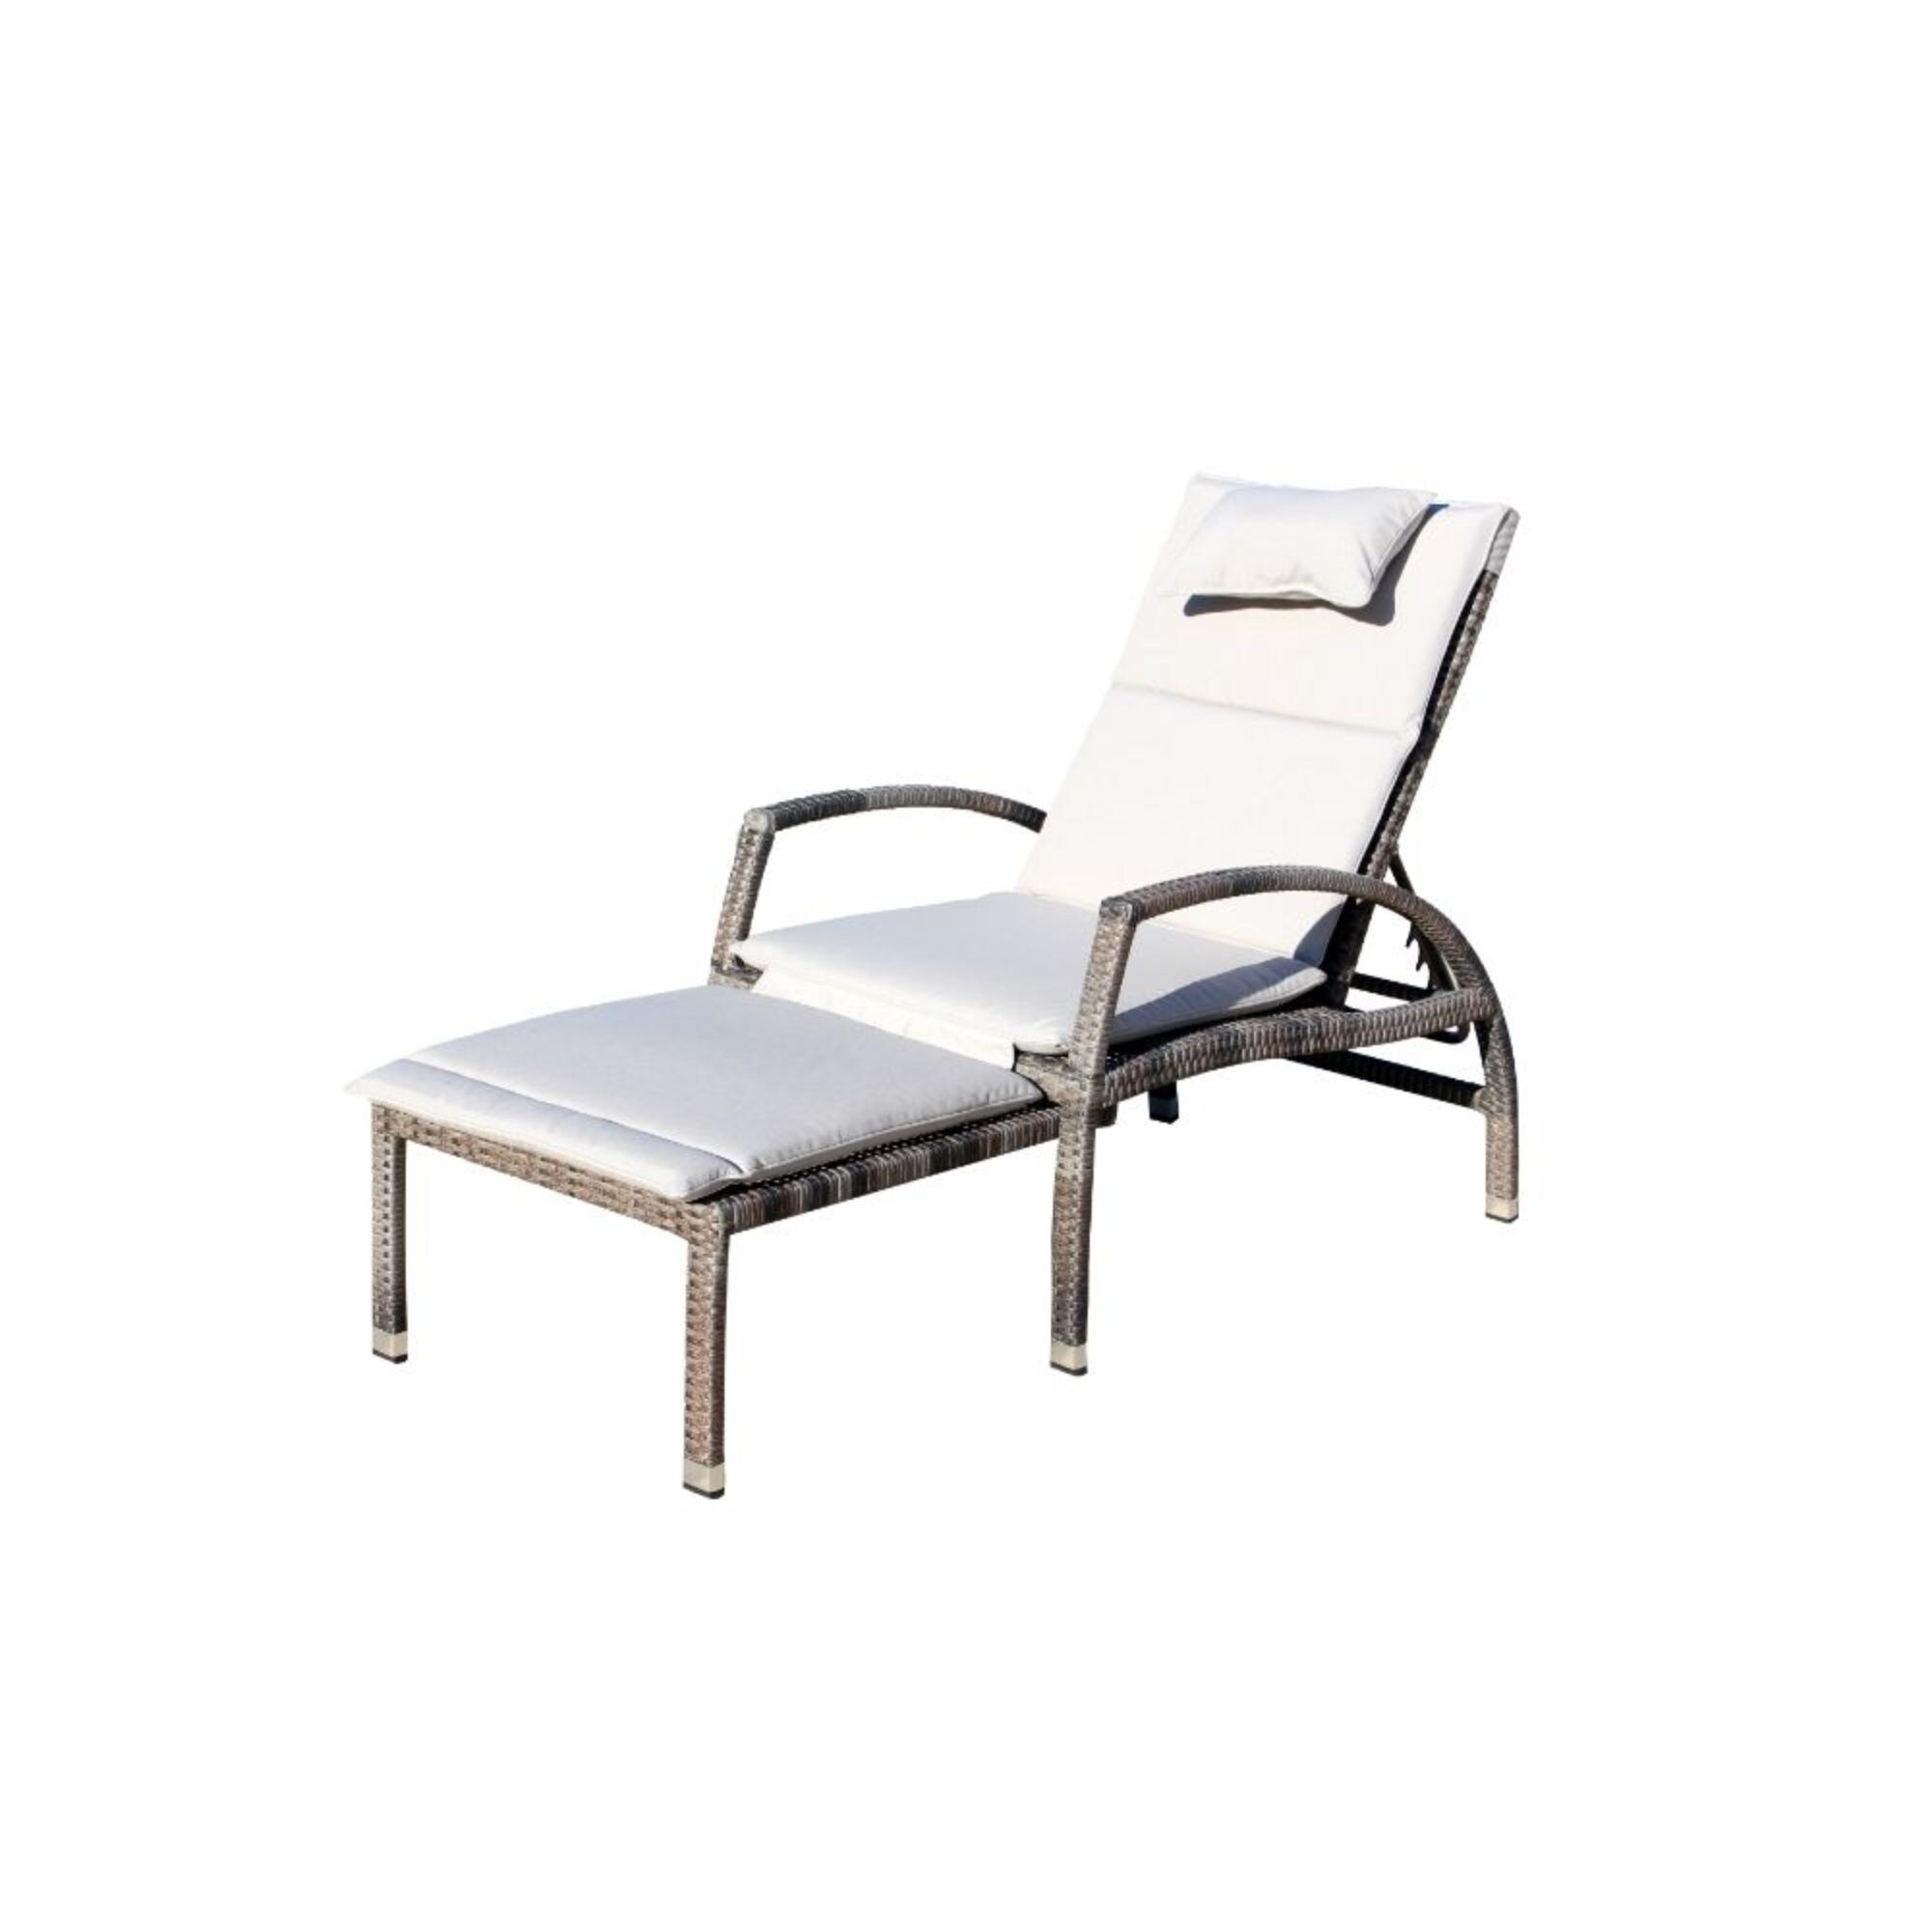 Courtyard Casual Taupe Beach Front Deck Chair to Chaise Lounge Combo - image 1 of 5